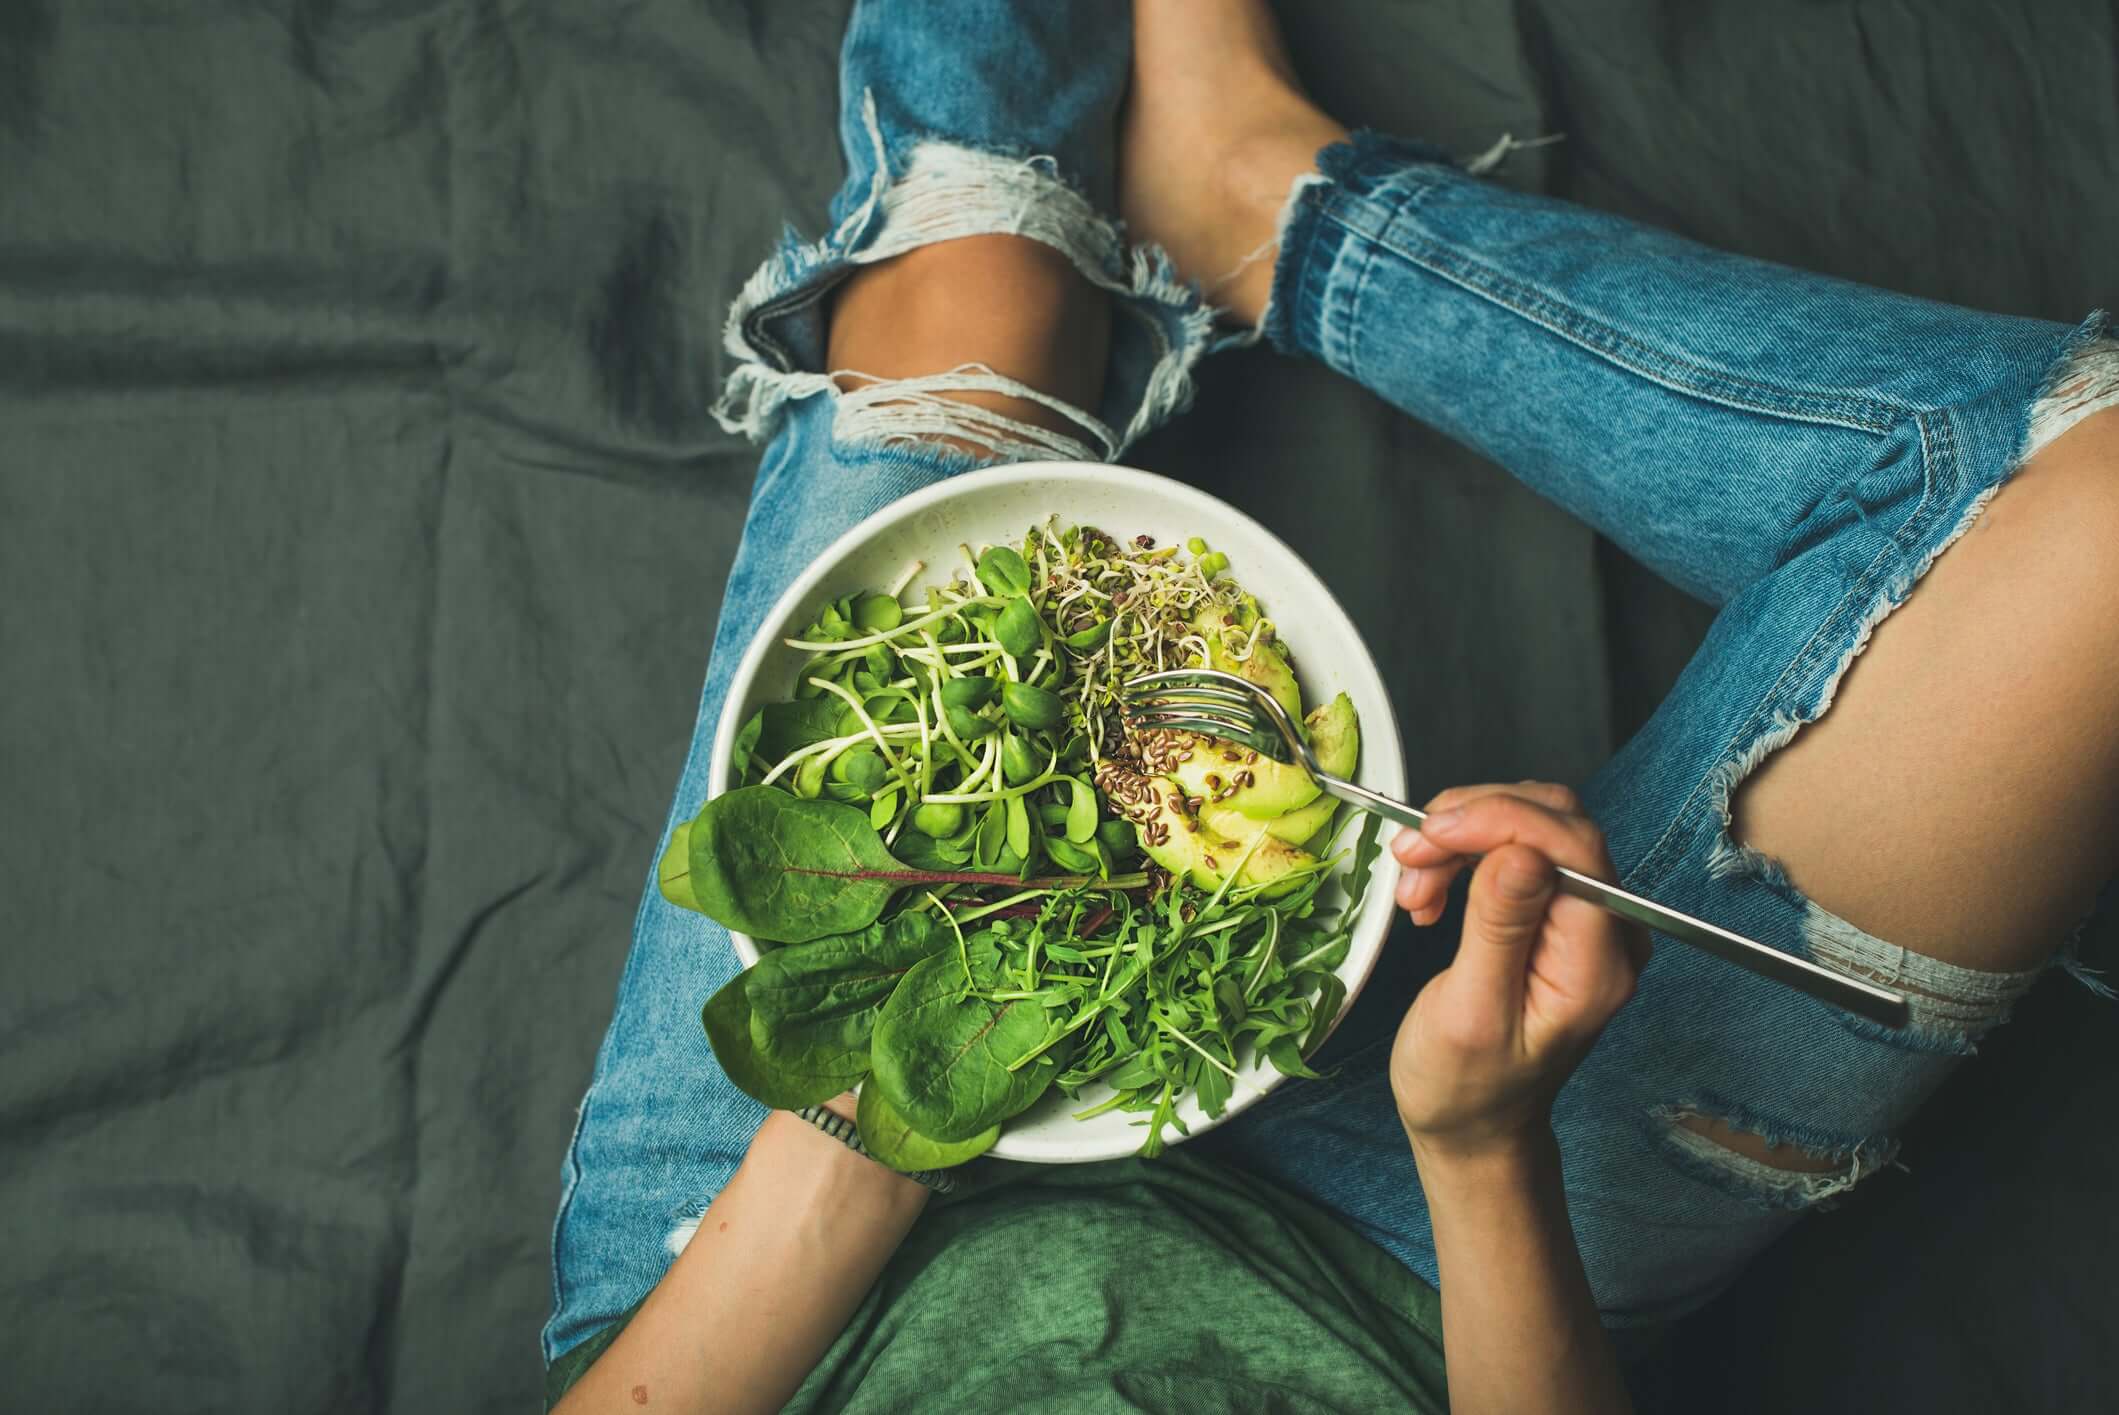 Girl in torn jeans sitting with a bowl of salad on her lap holding a fork